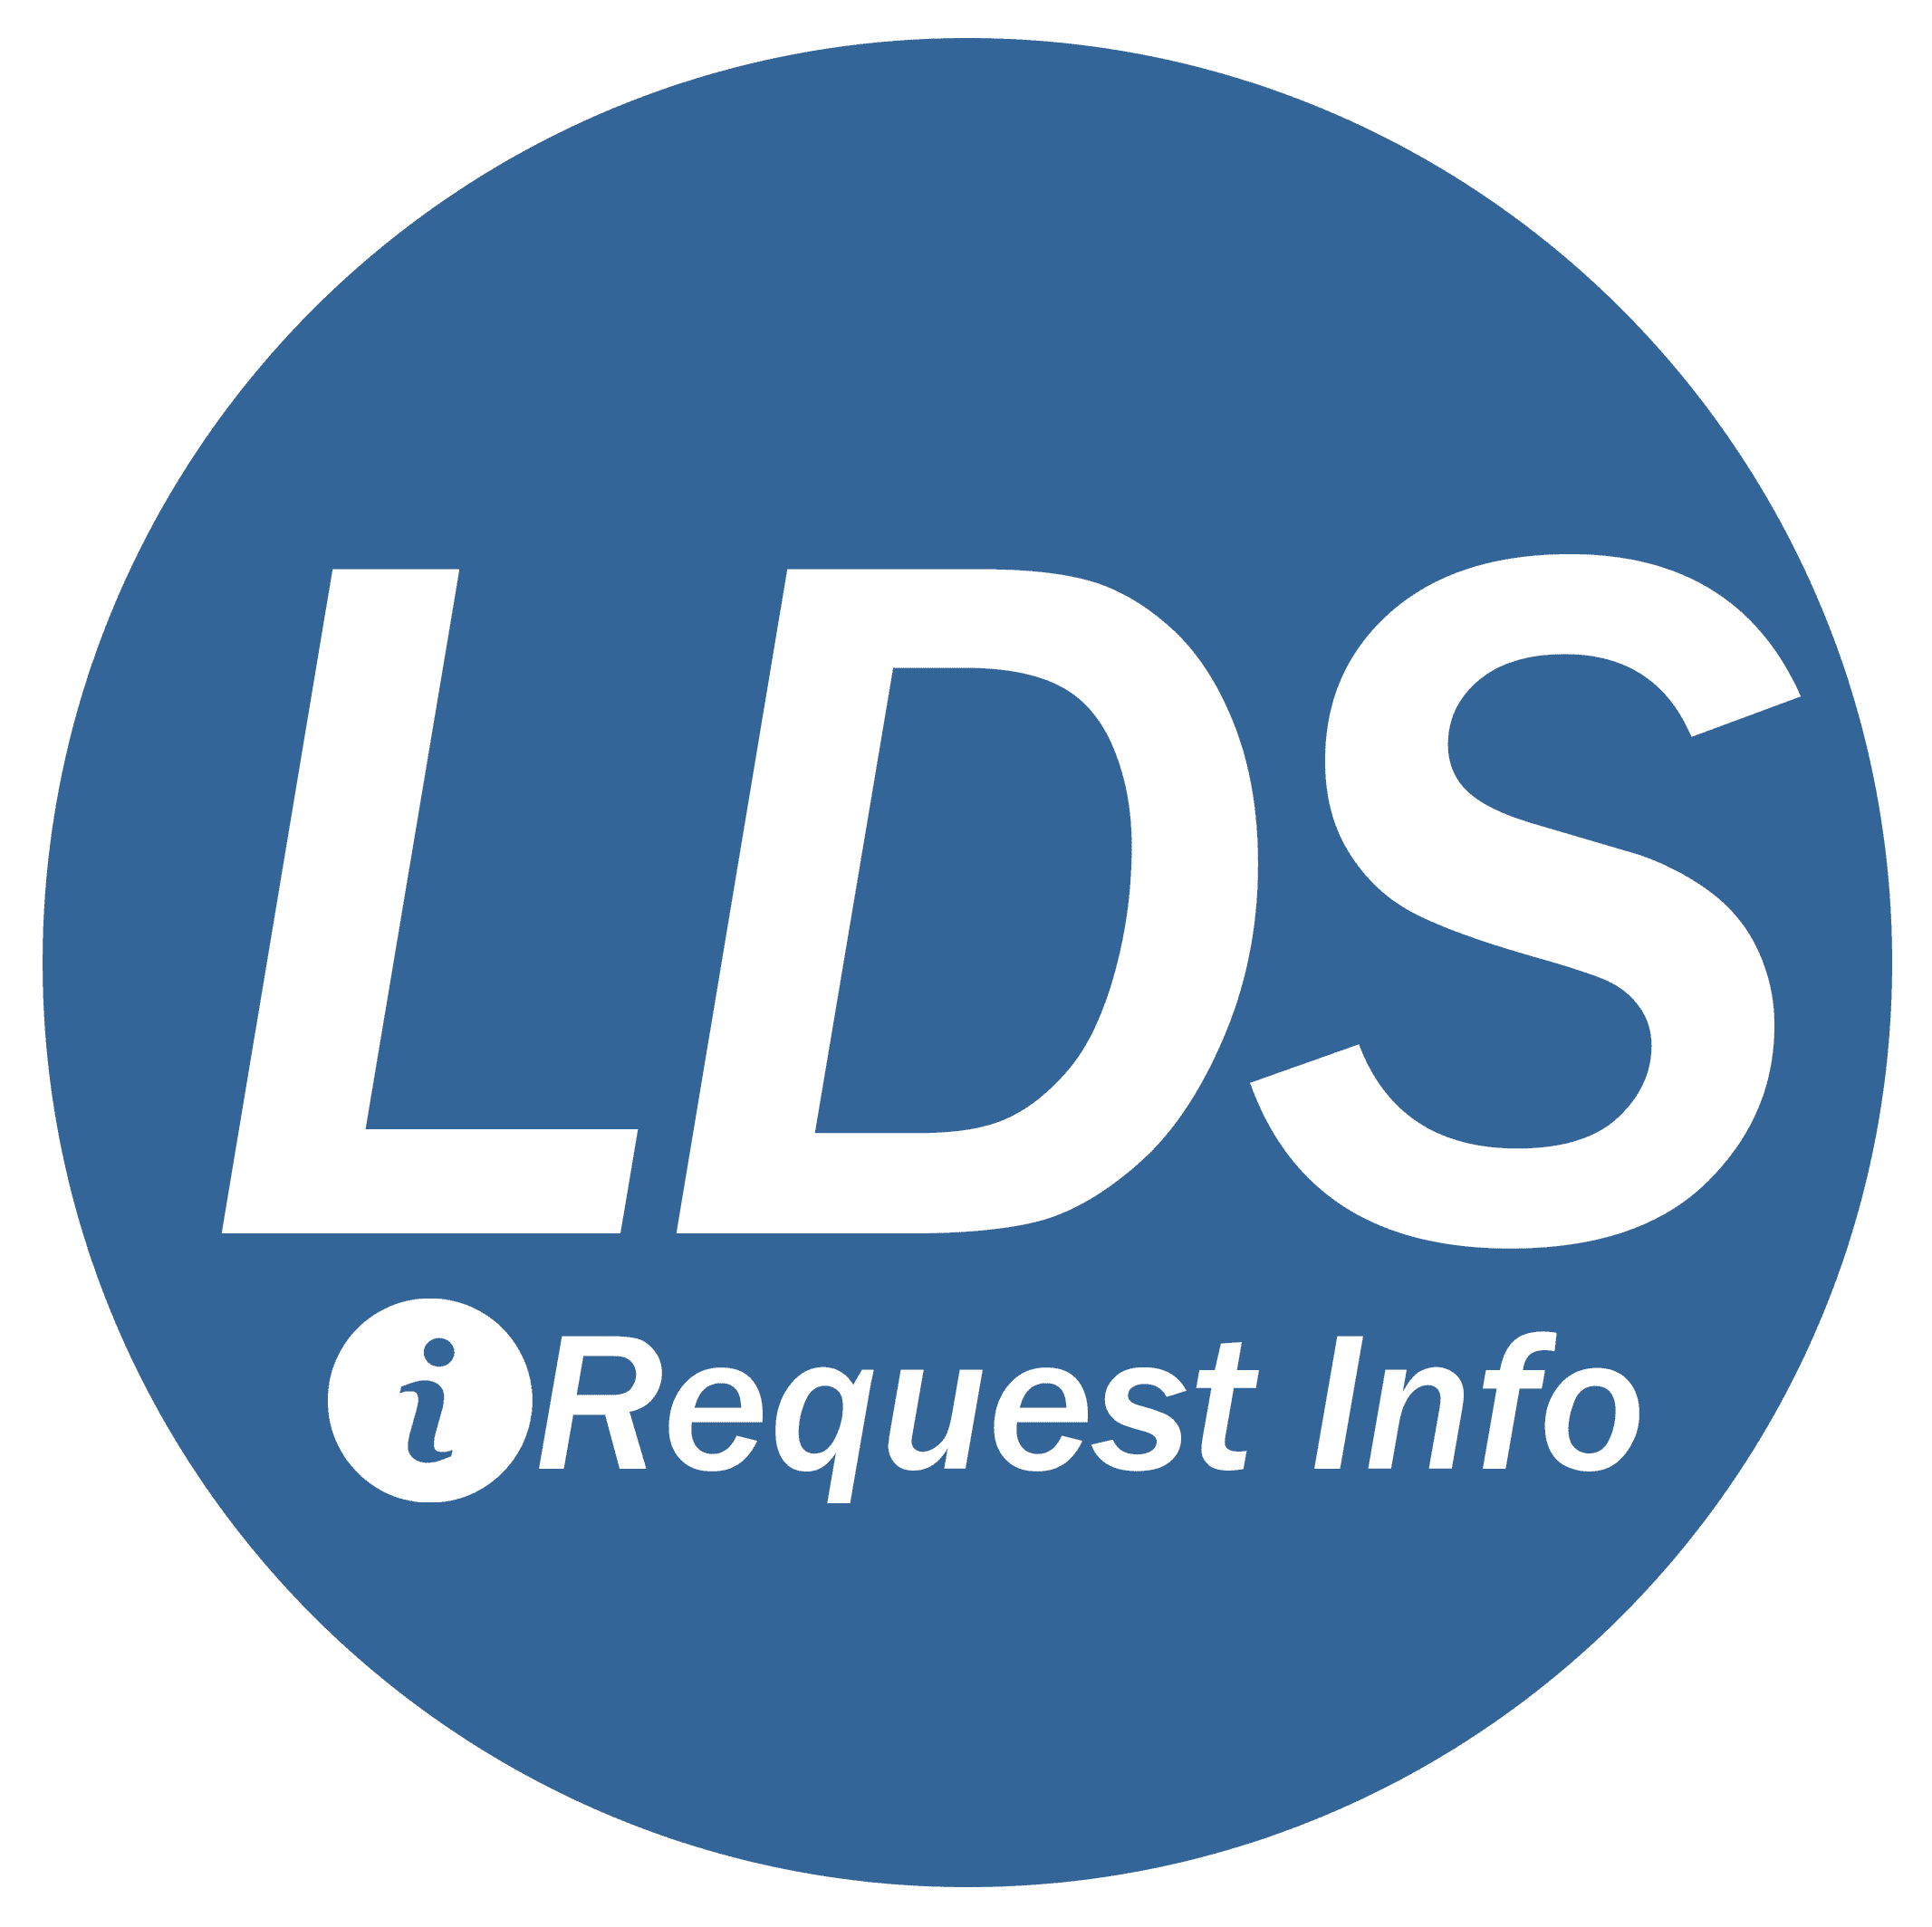 Go to the Request Info section on the LDS Vacuum Shopper